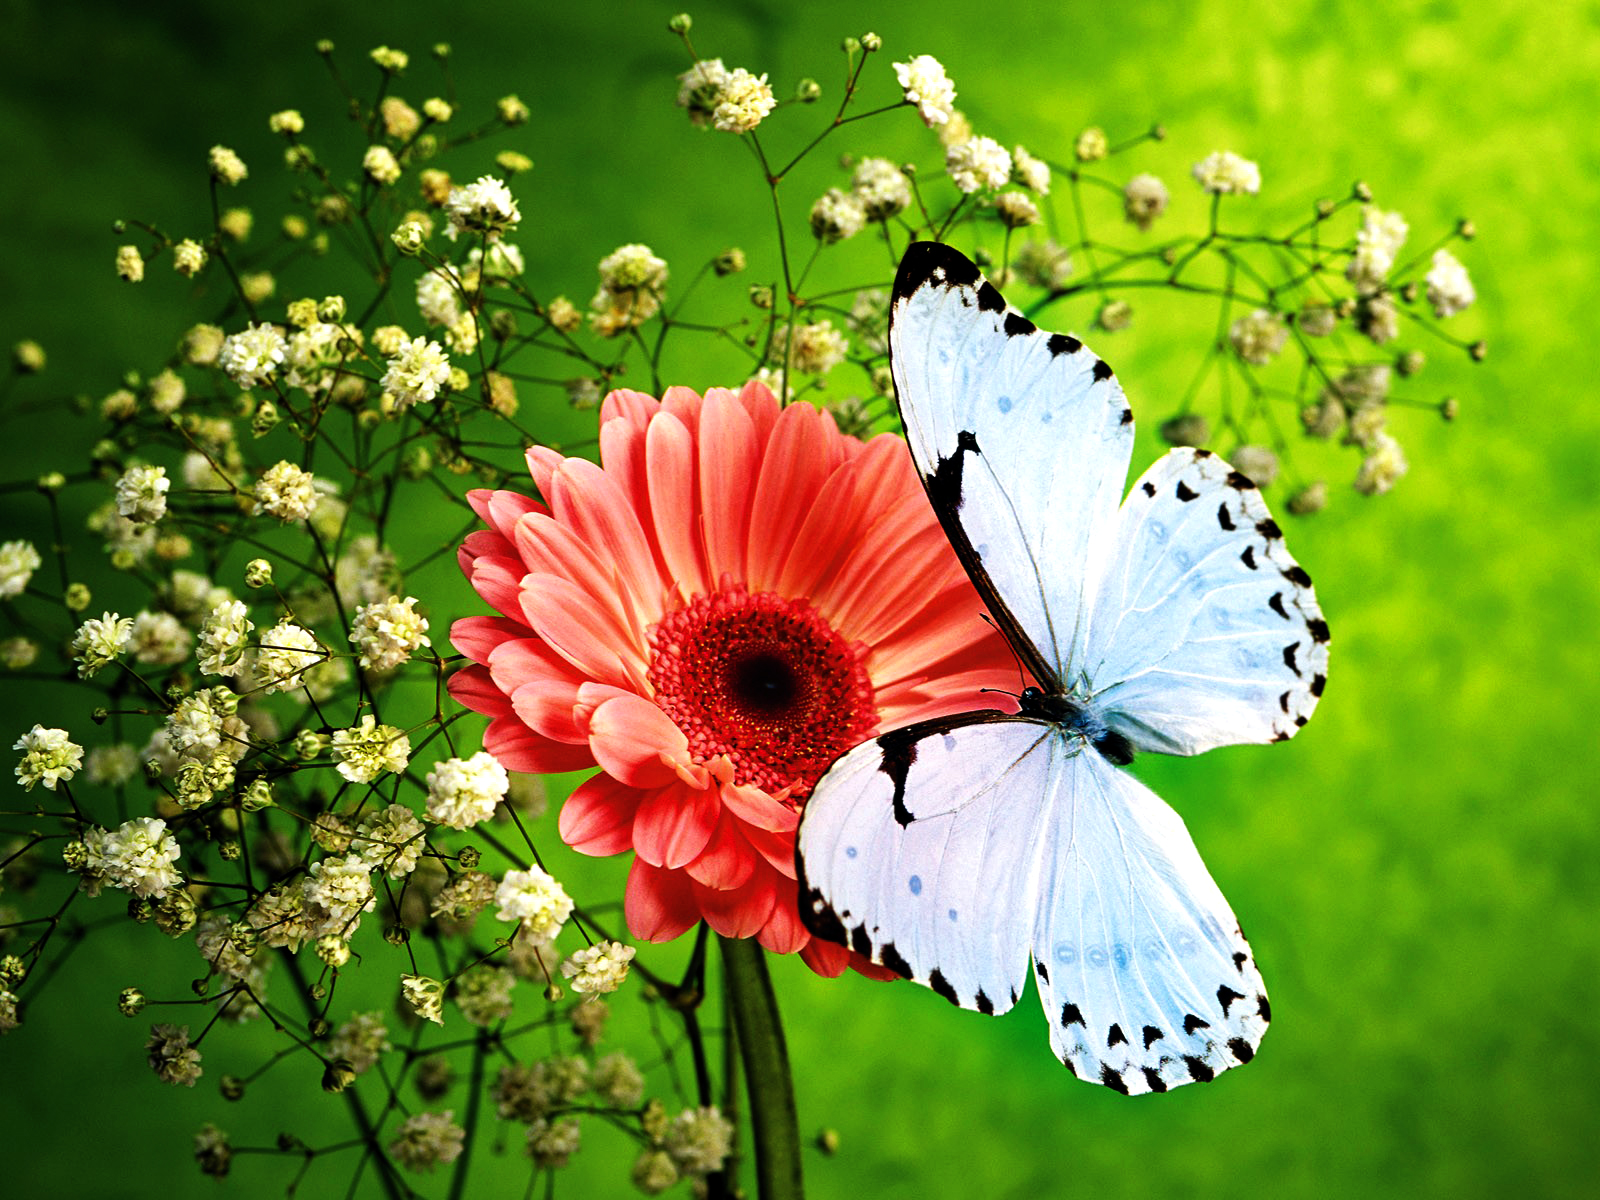 COLORS OF NATURE HD BUTTERFLY WALLPAPERS For Windows 7 - XP - Vista ...